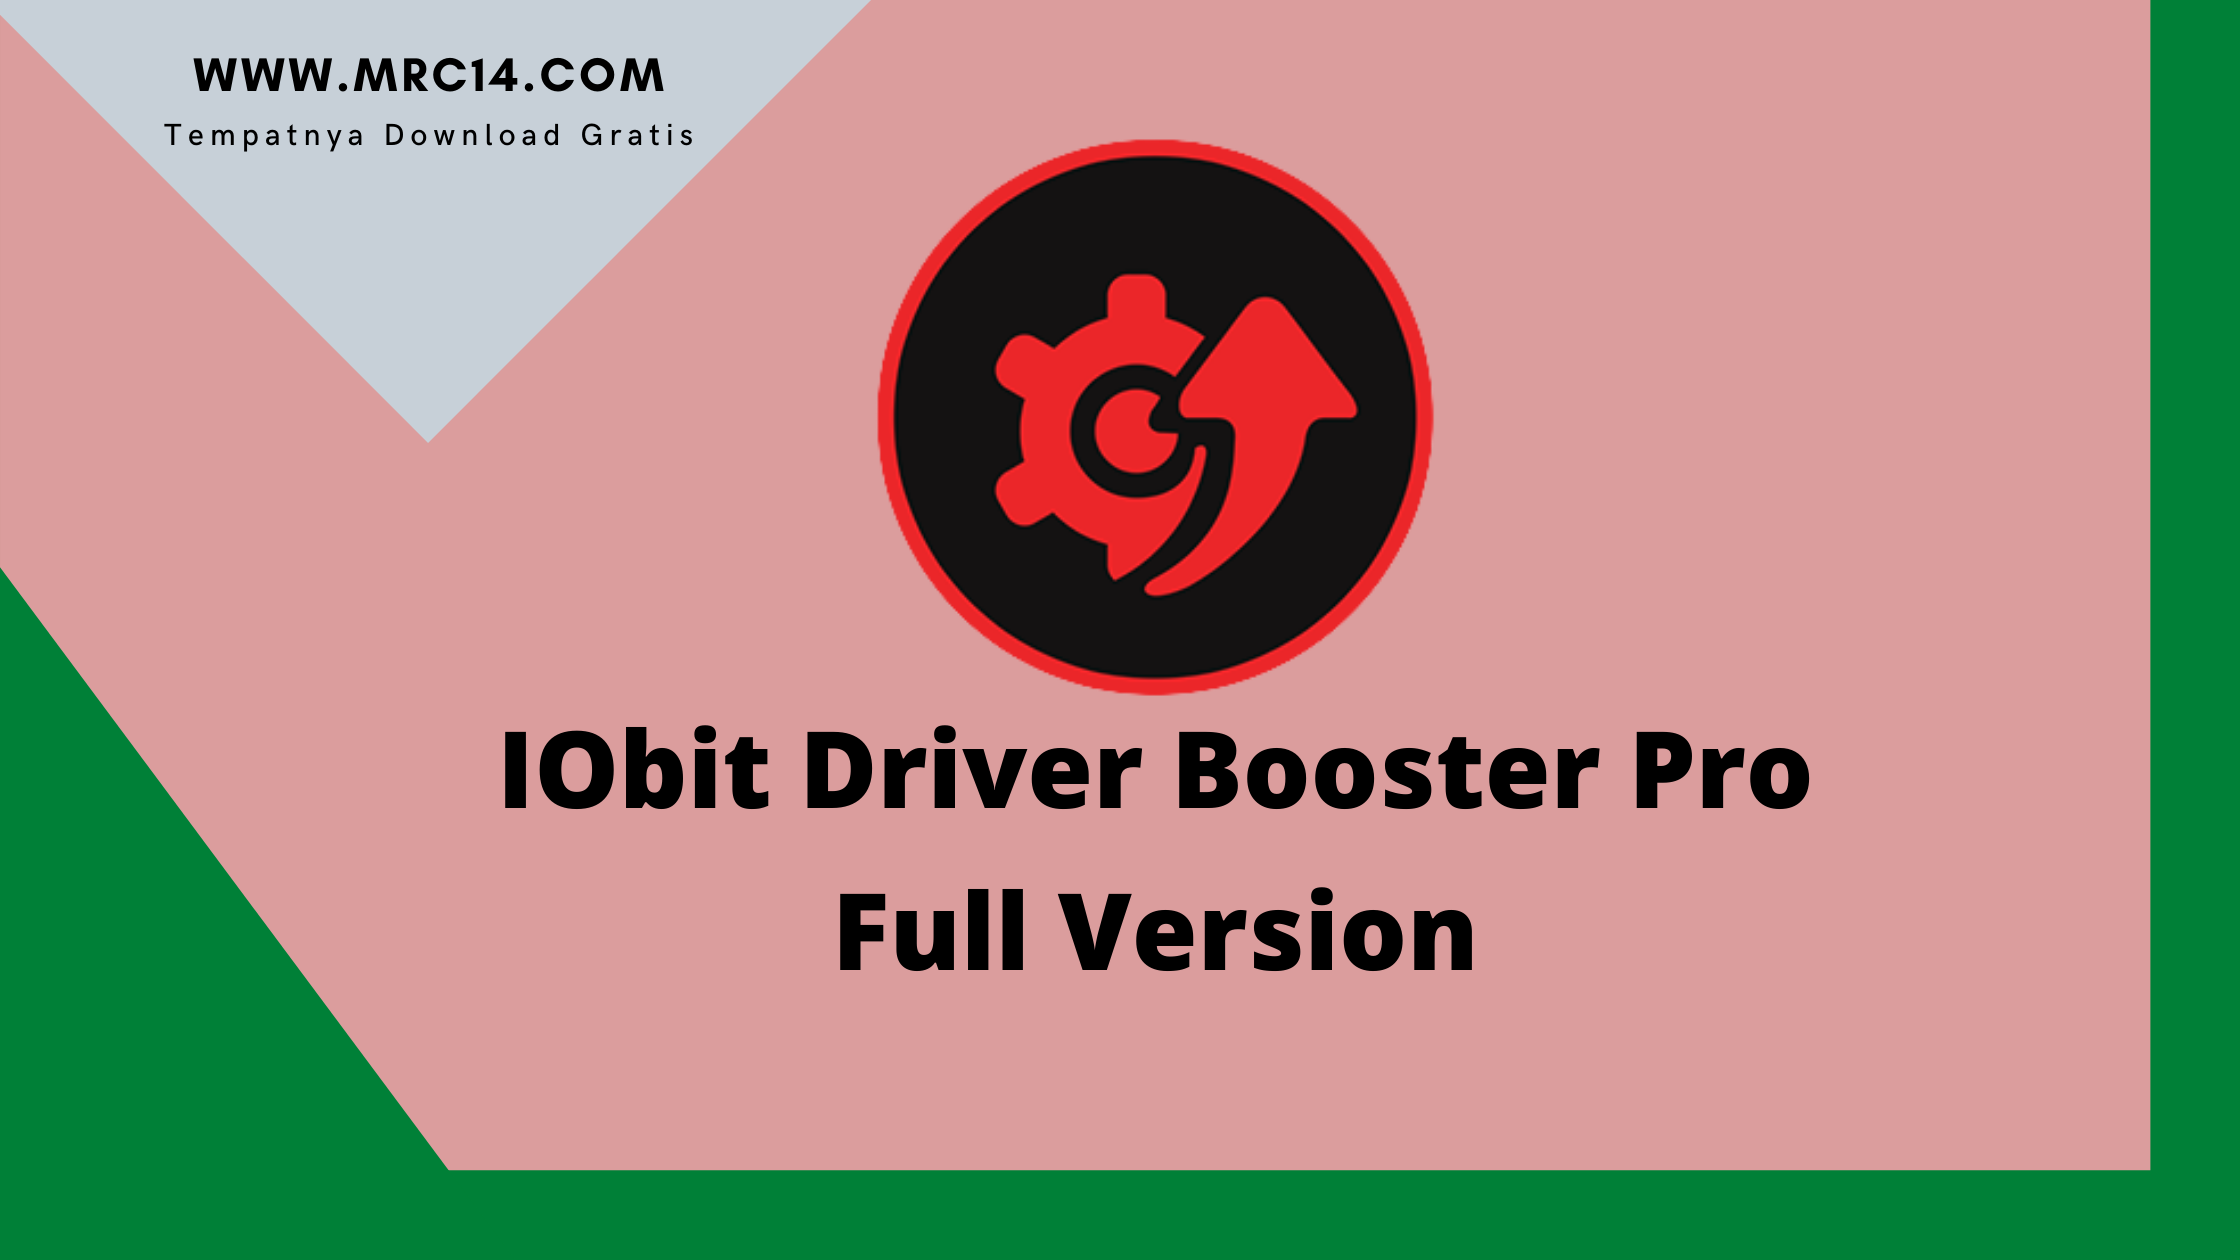 iobit driver booster pro full version